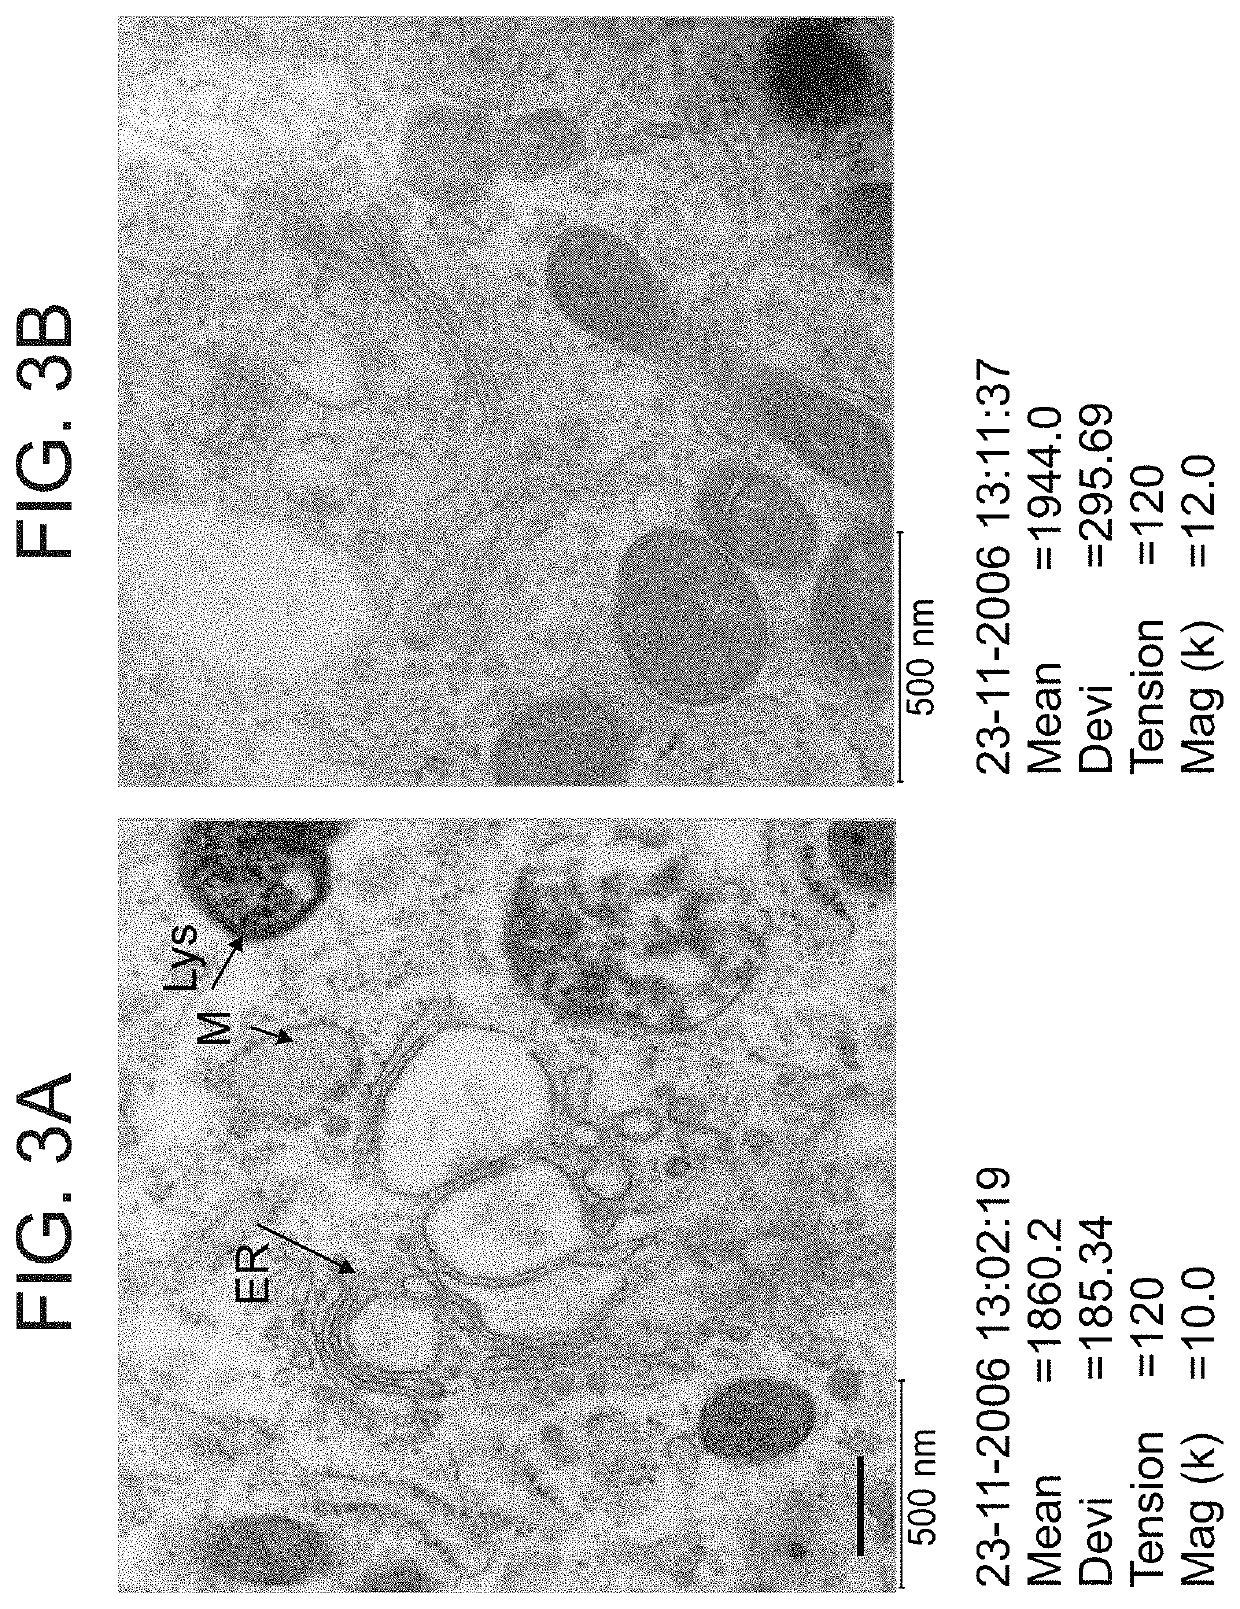 Methods of treating diseases associated with cells exhibiting er stress or with neural tissue damage